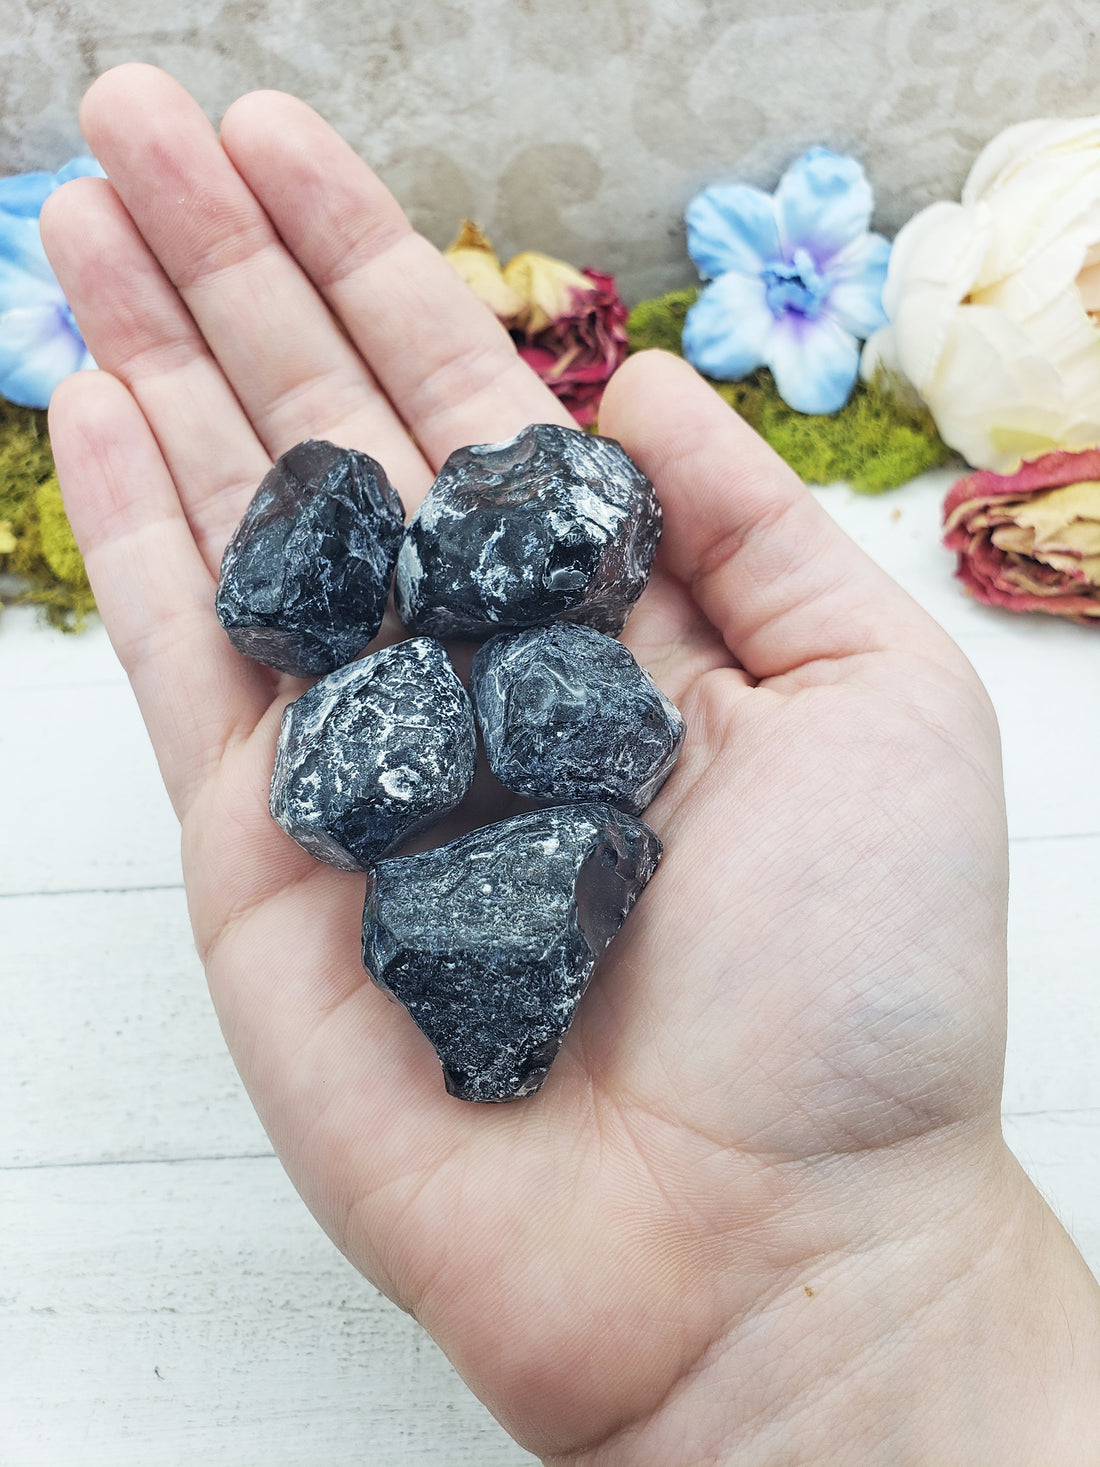 apache tear stones in hand